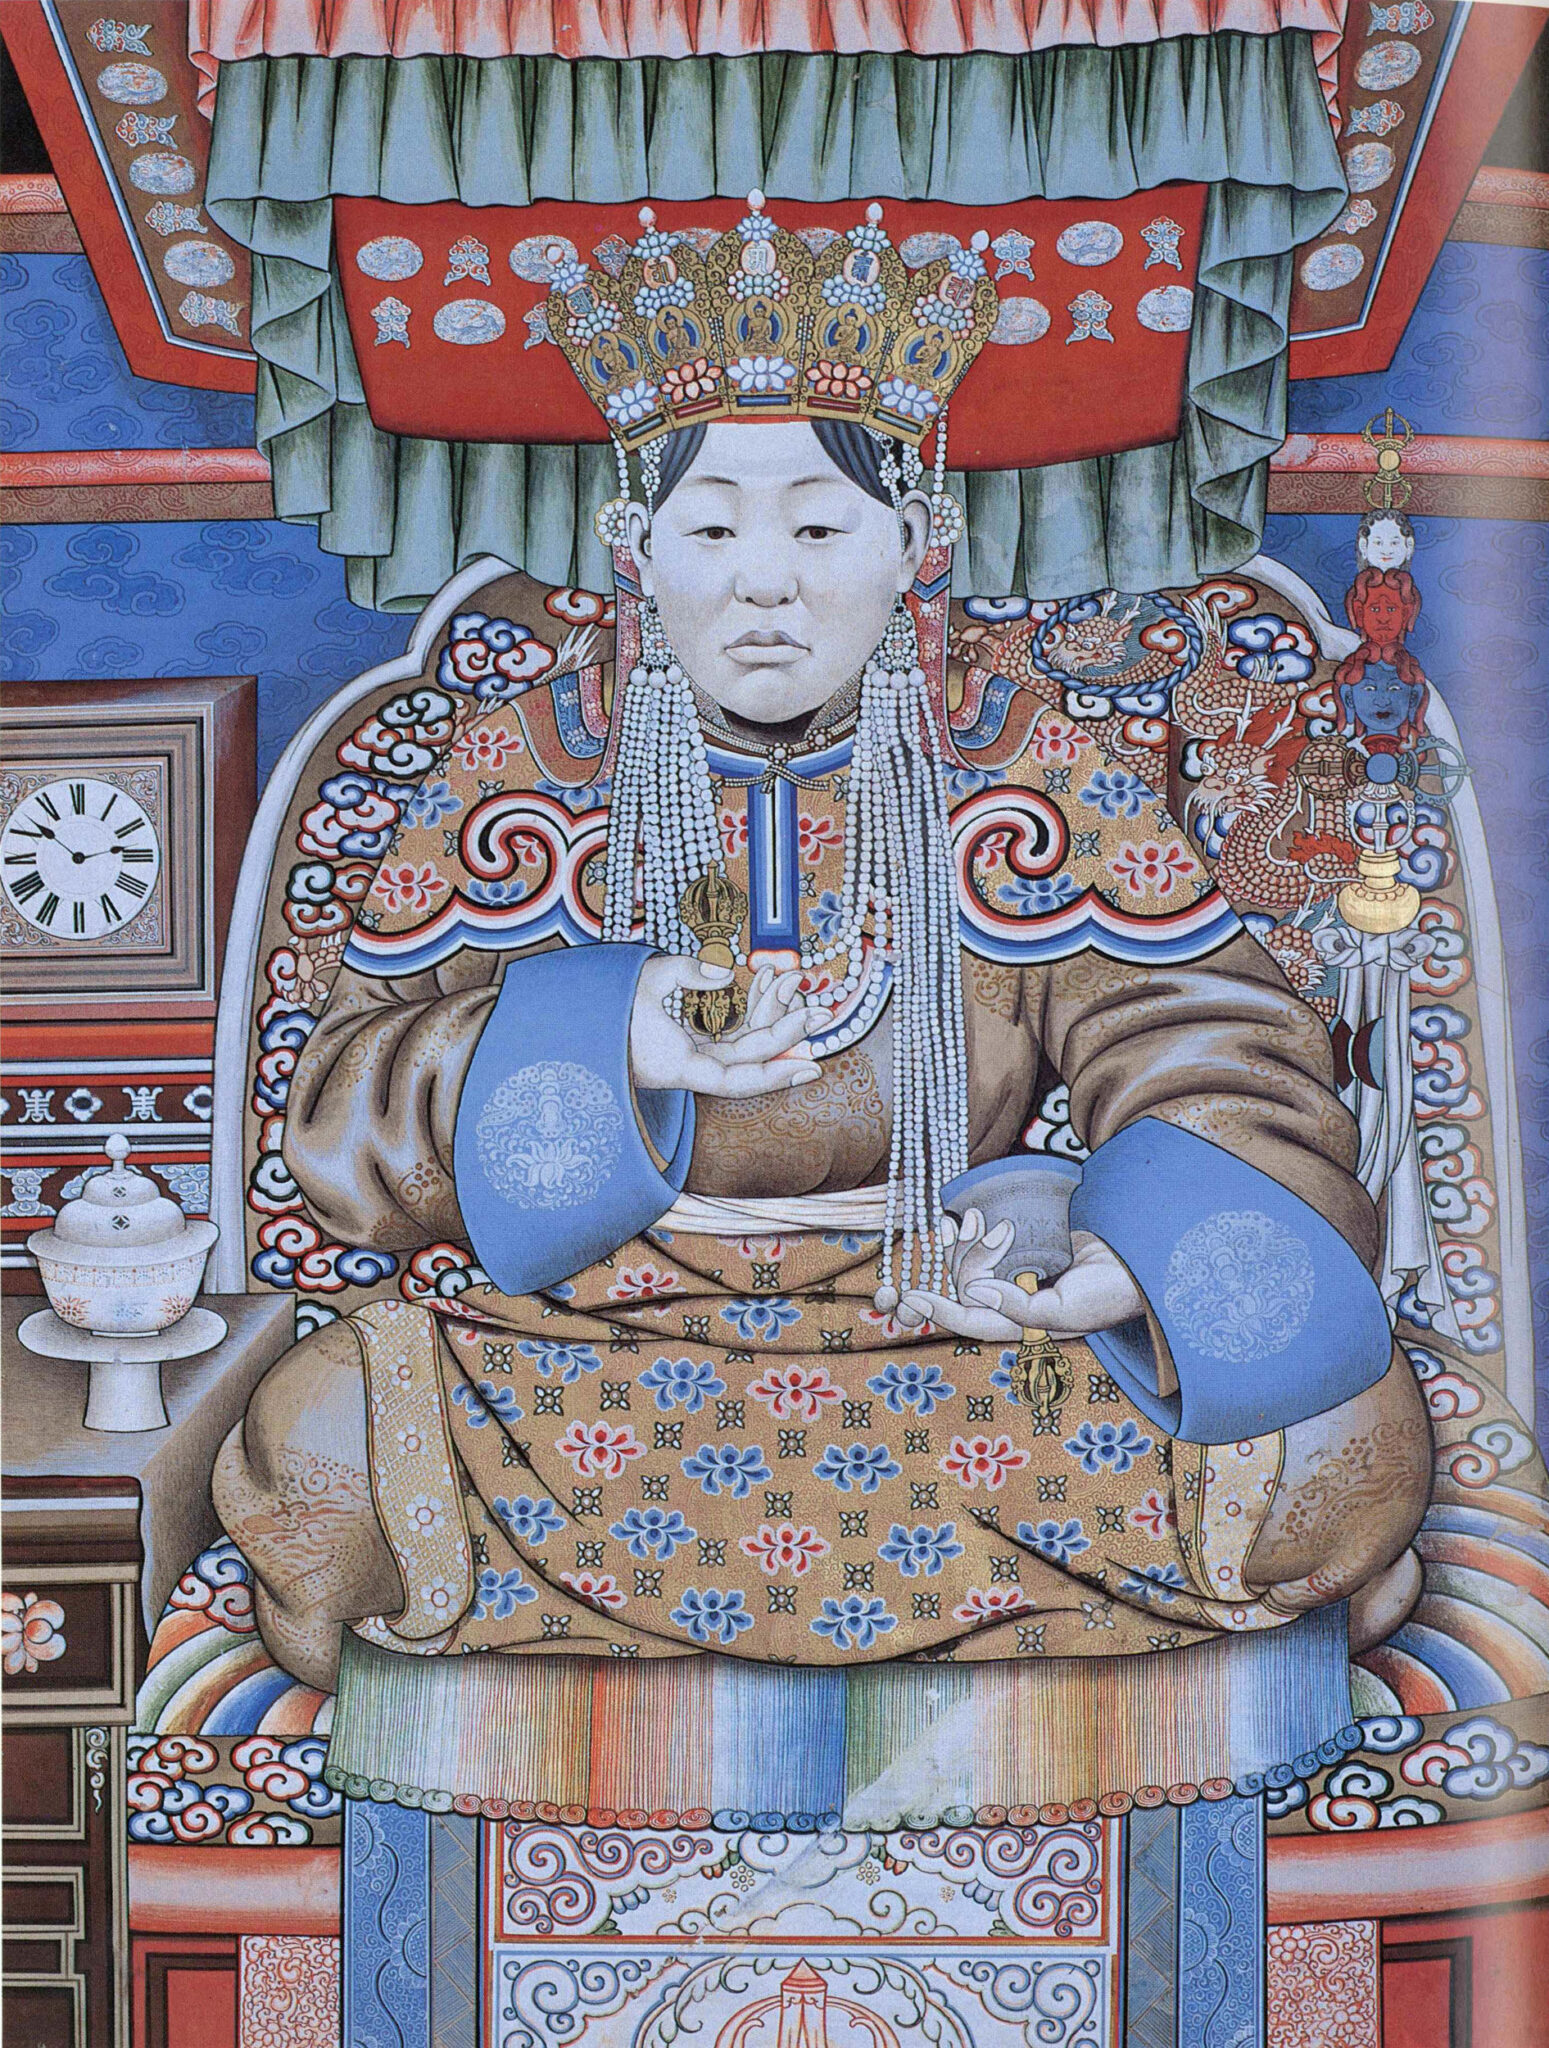 Noblewoman wearing pearl-tasseled crown, seated on canopied throne, holding vajra and bell in hands